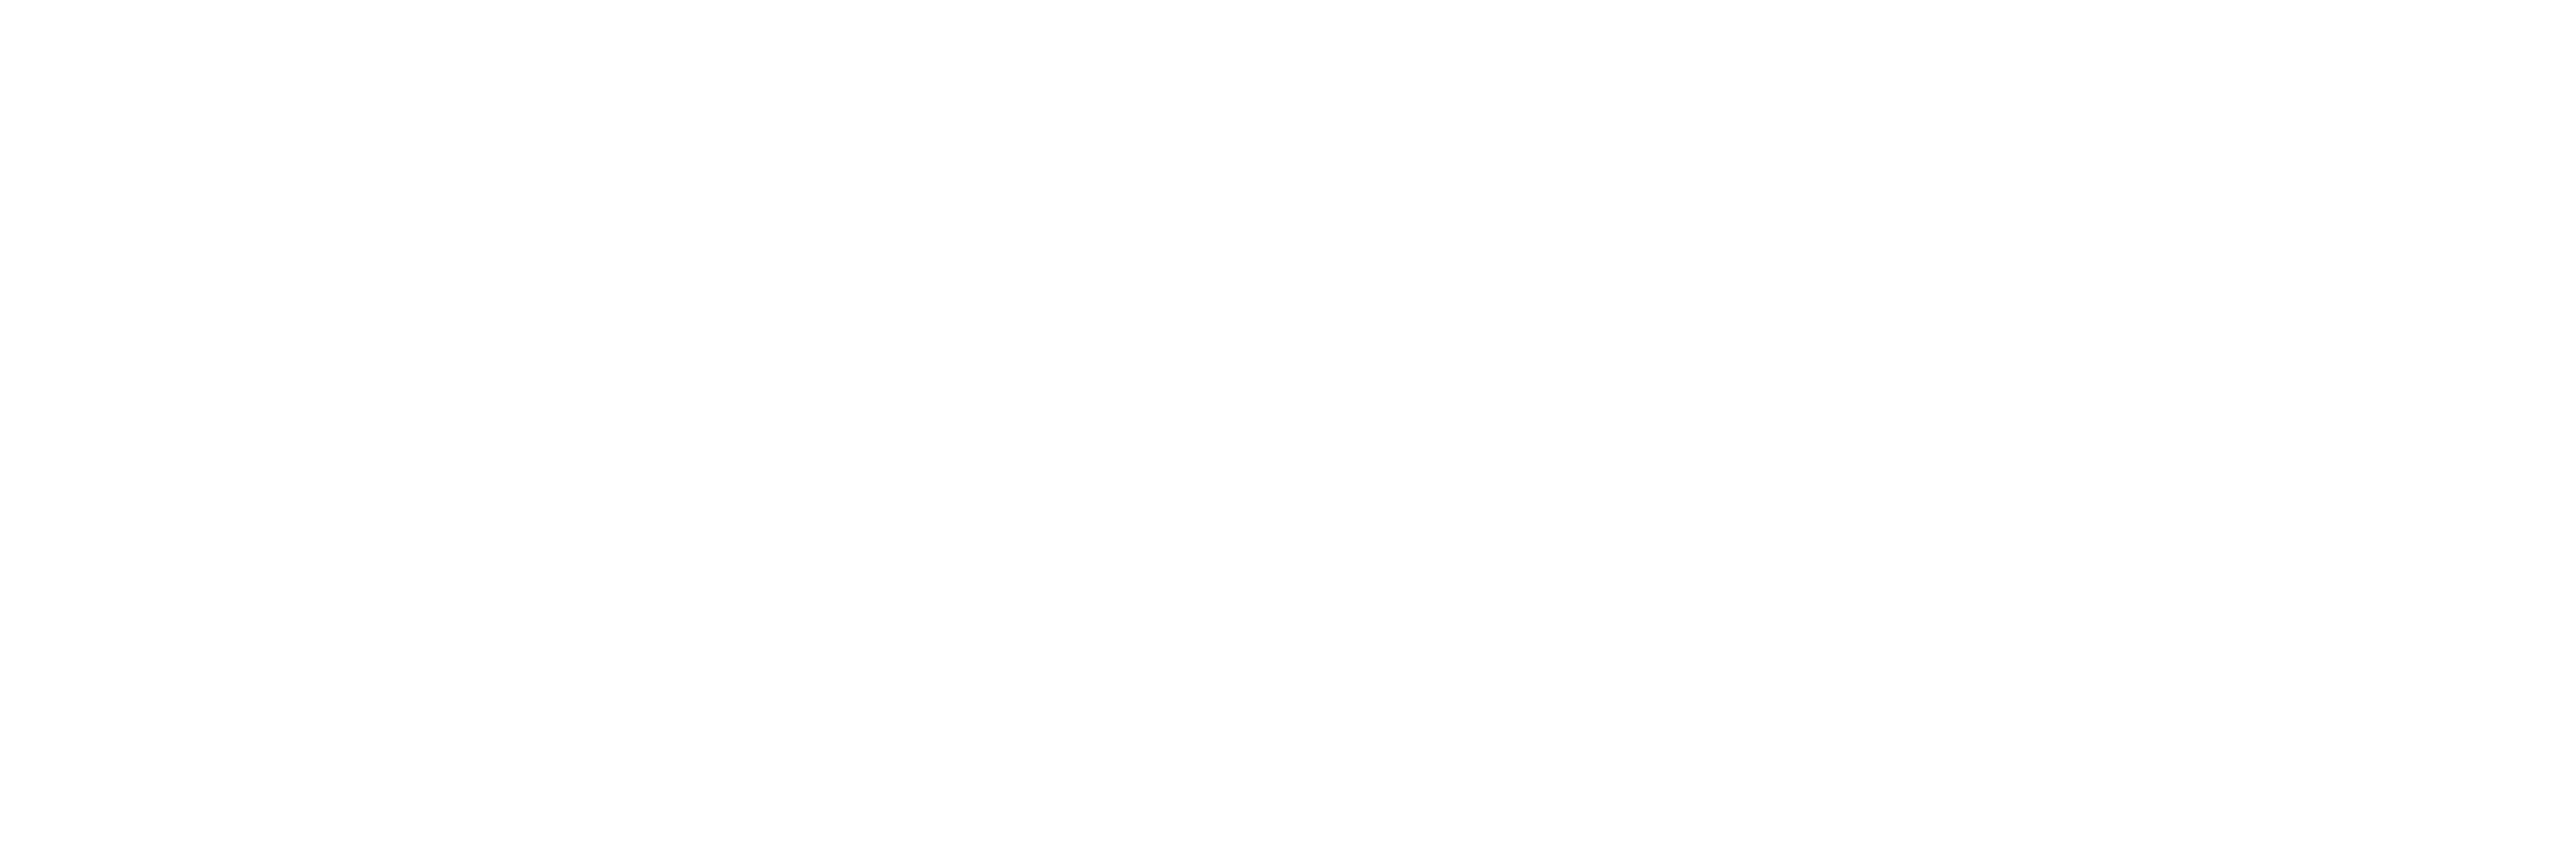 First Aid For Stress logo